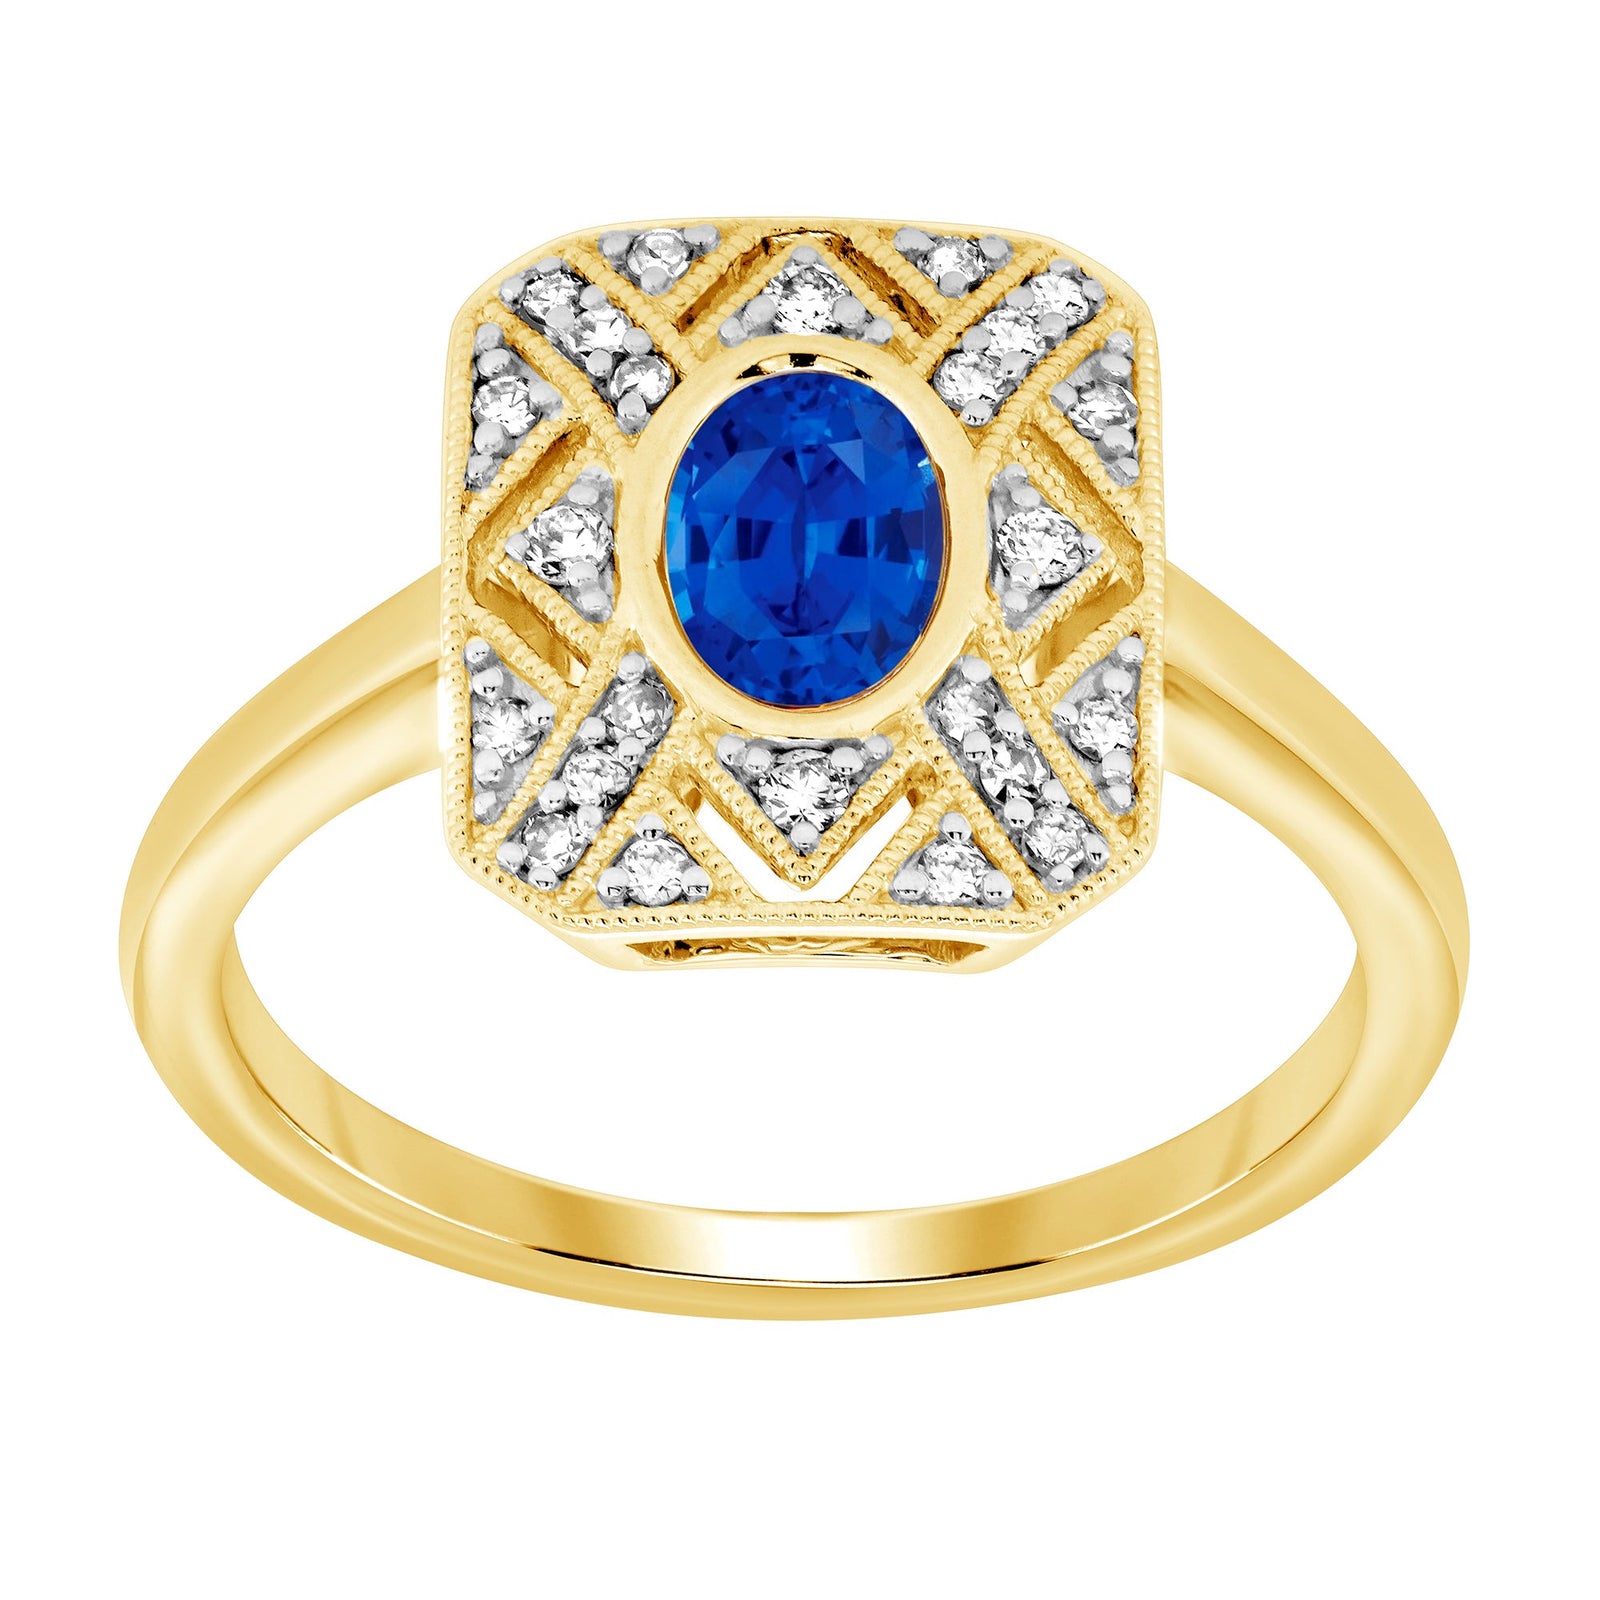 9ct gold 7x5mm oval sapphire & diamond antique style ring 0.17ct